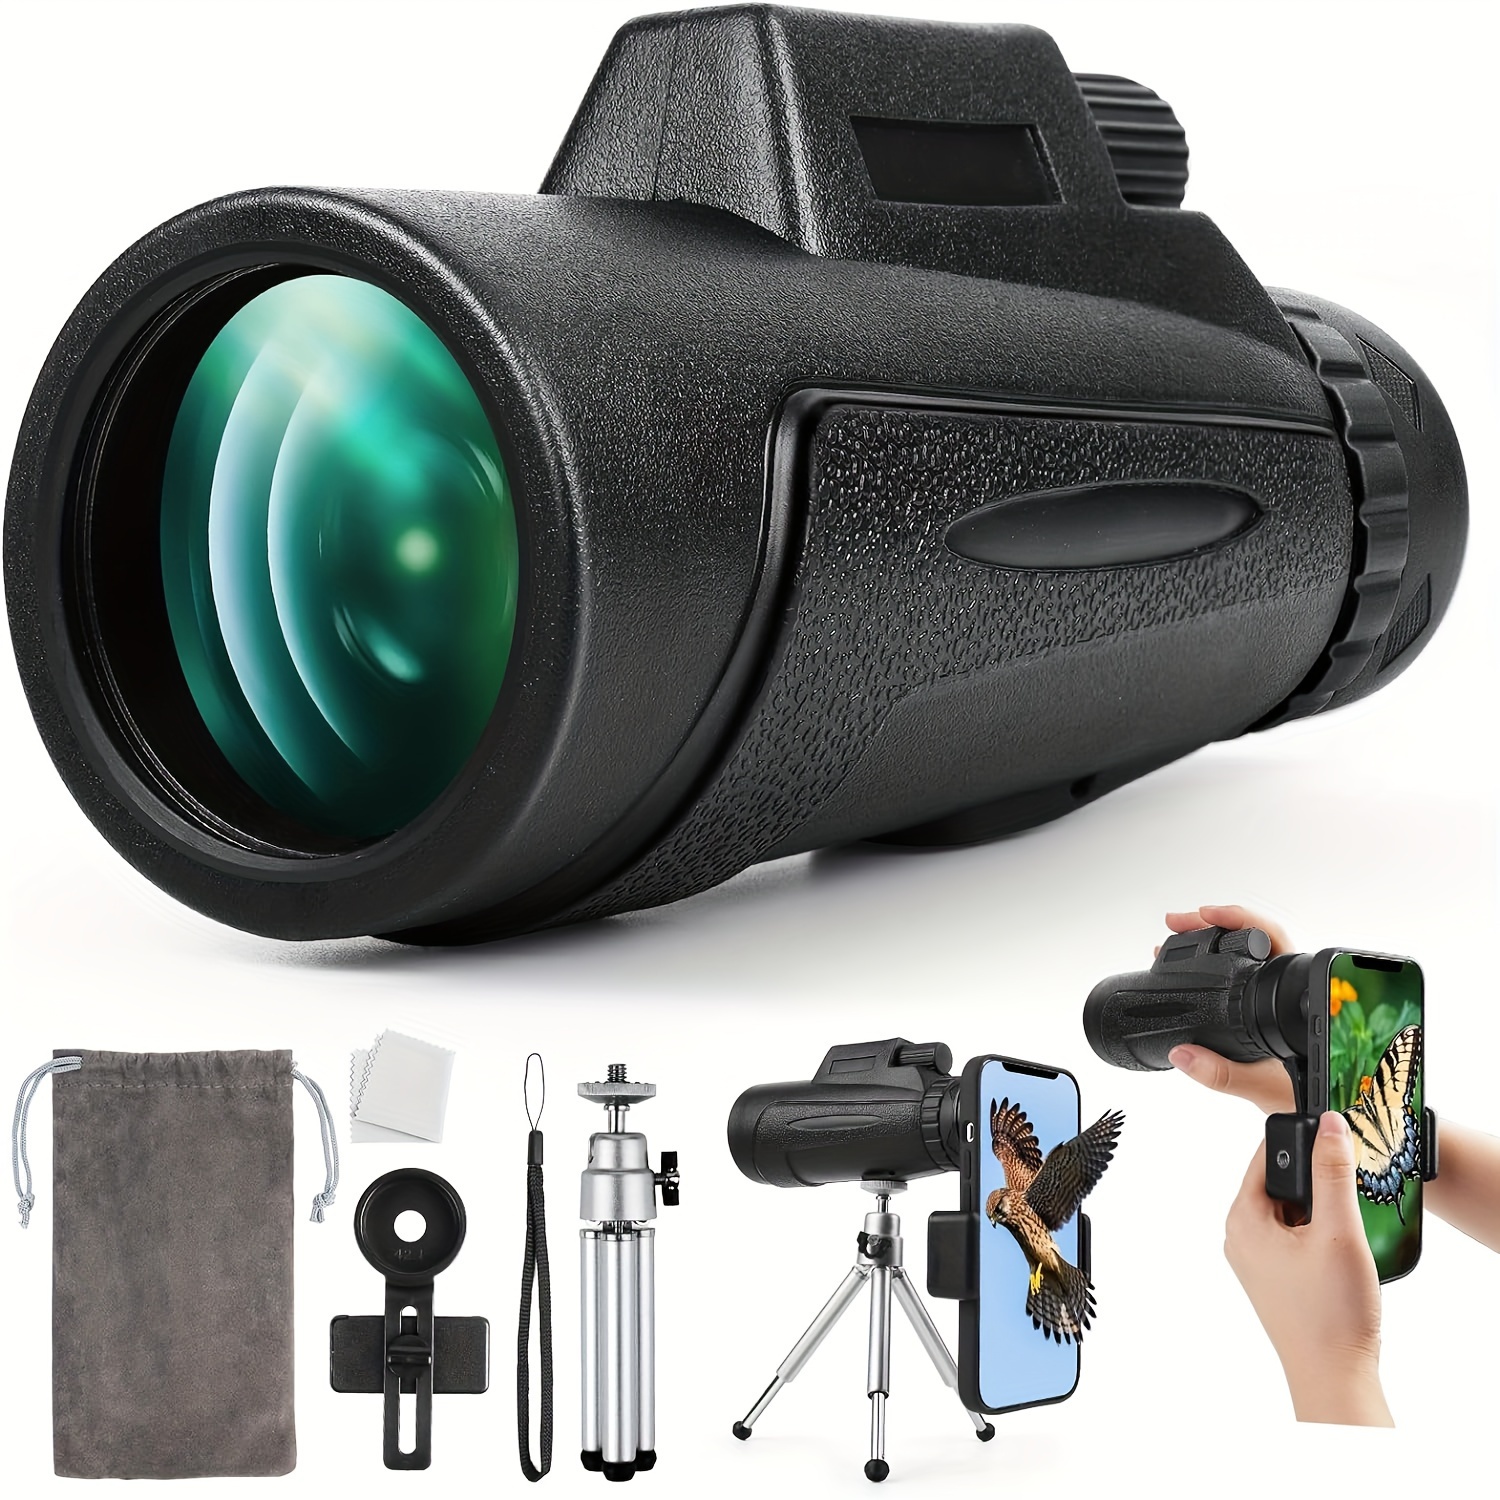 

12x50 Hd Monocular Telescope For Smartphone, Monoculars For Adults High Powered With Bak4 Prism And Fmc Lens, Low Night Vision